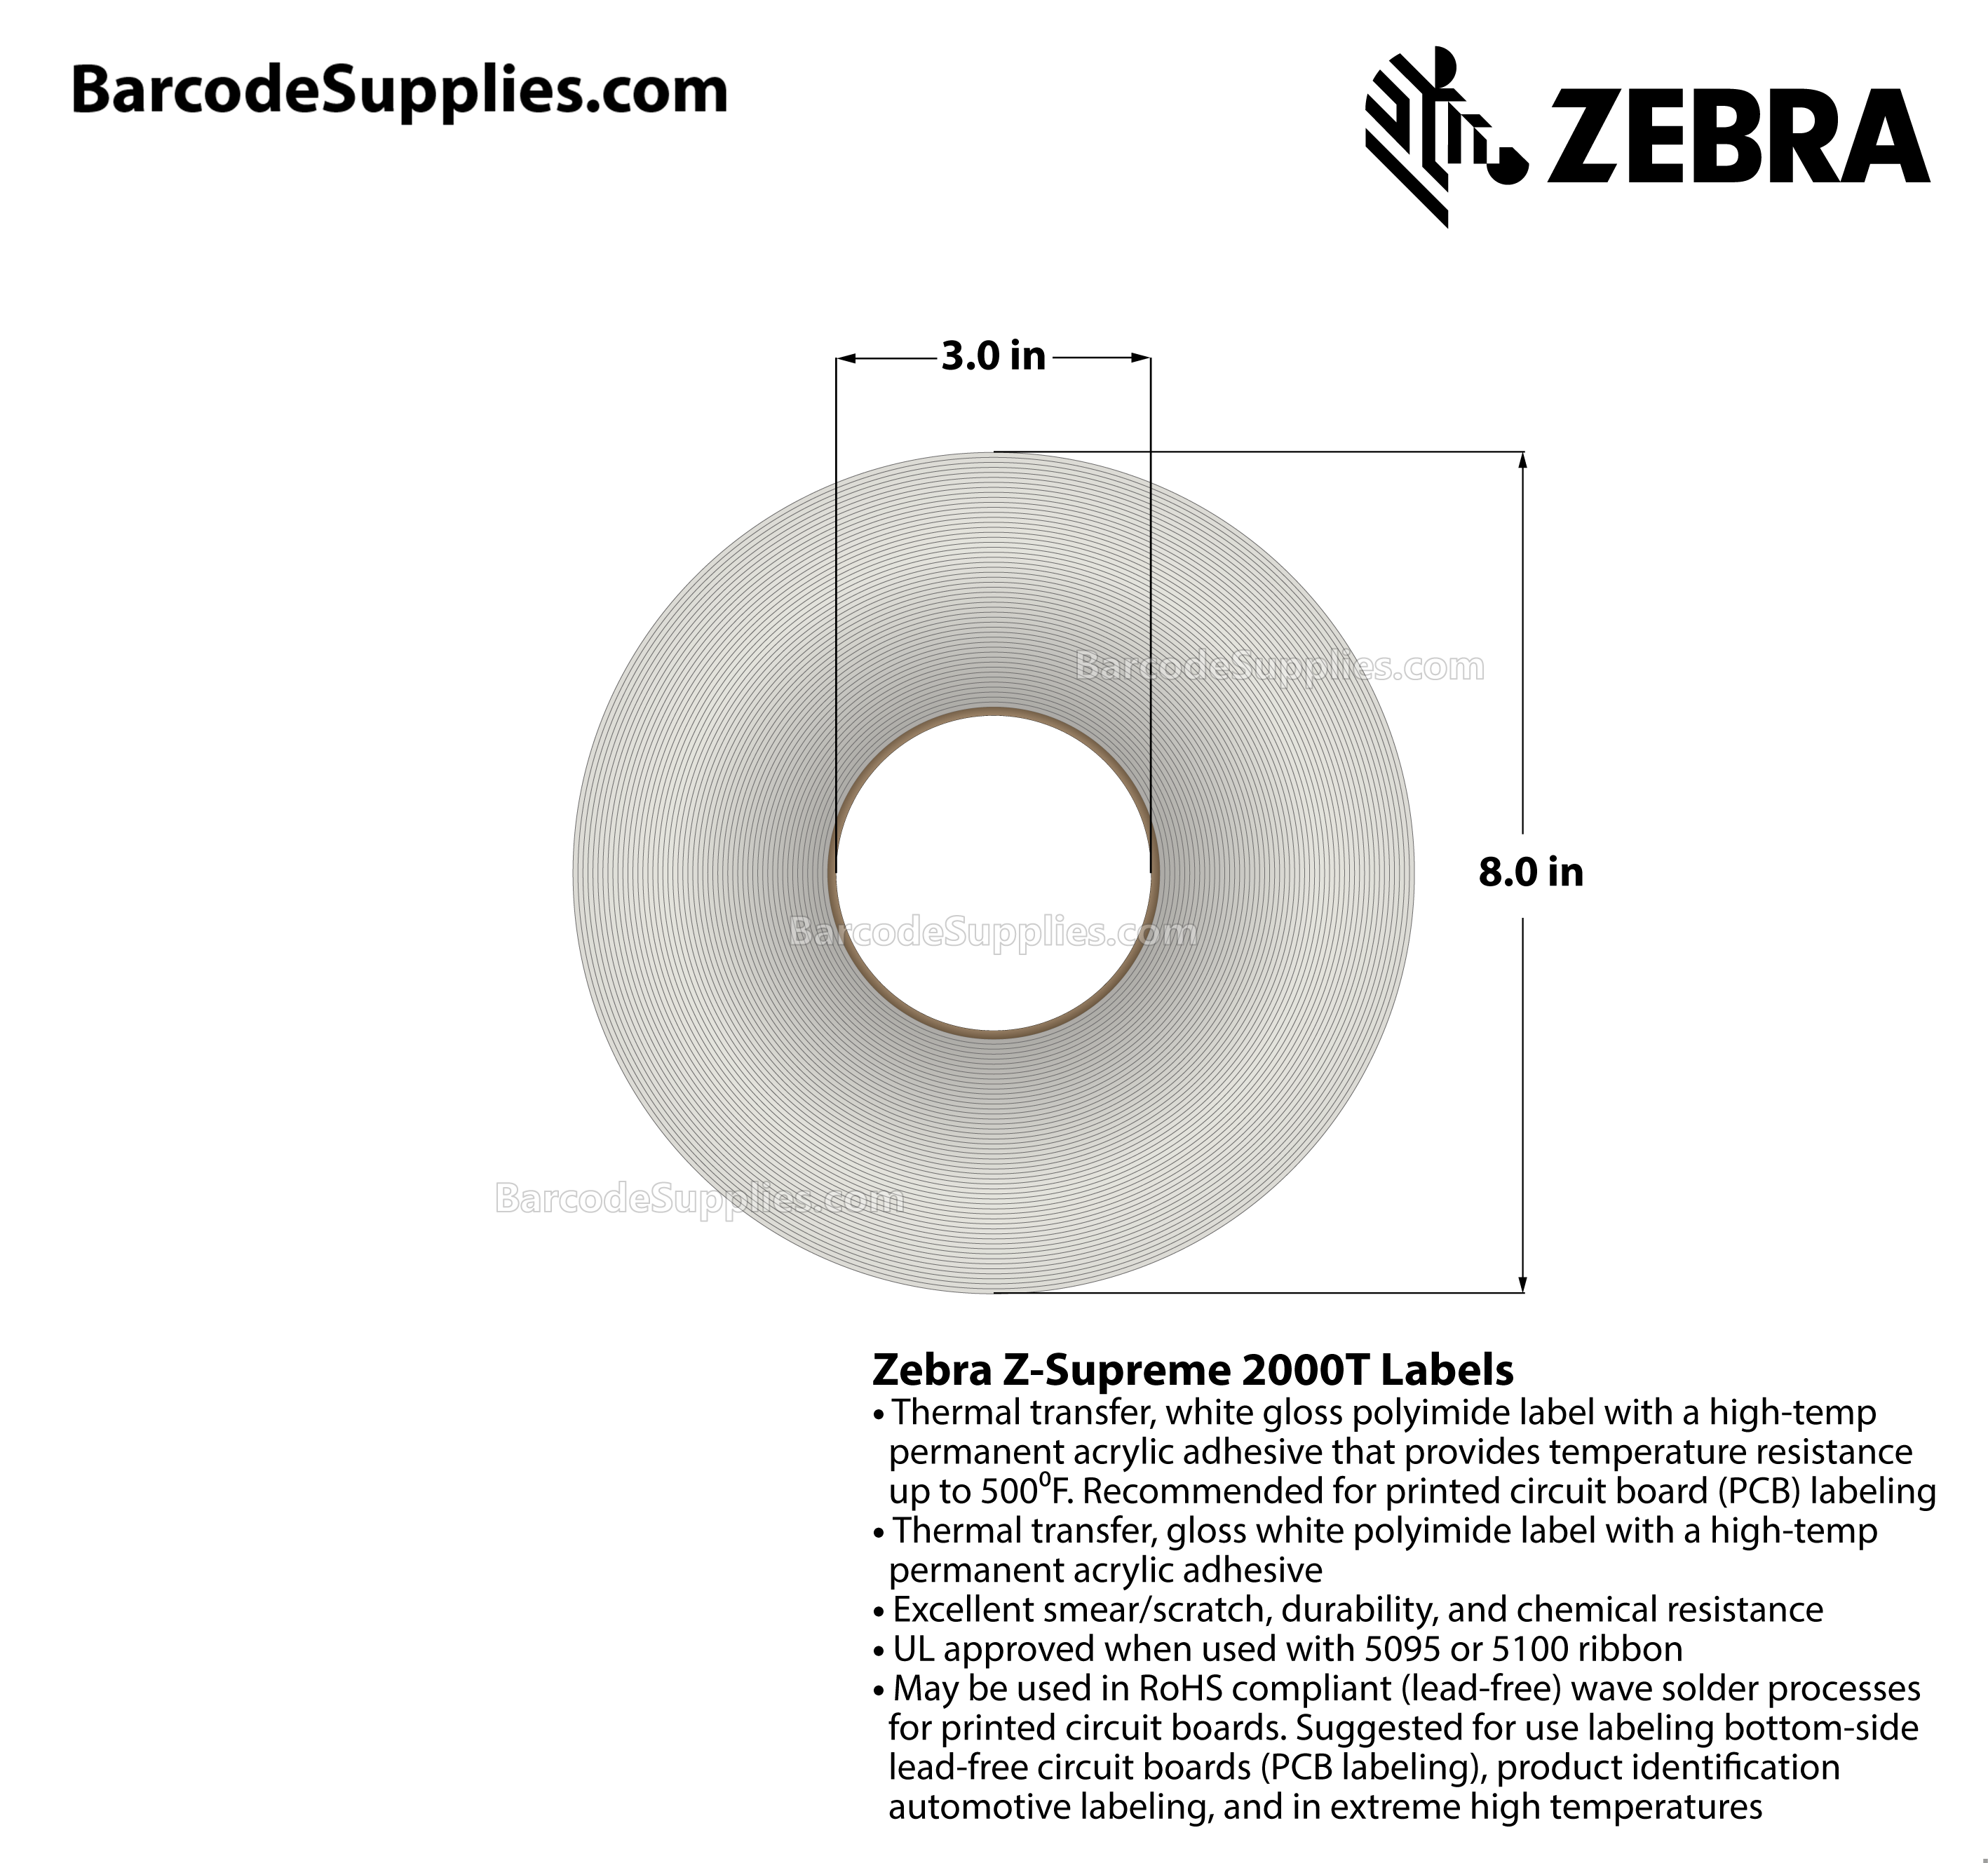 0.5 x 0.438 Thermal Transfer White Z-Supreme 2000T (5-Across) Labels With High-temp Adhesive - Perforated - 10000 Labels Per Roll - Carton Of 1 Rolls - 10000 Labels Total - MPN: 10023337